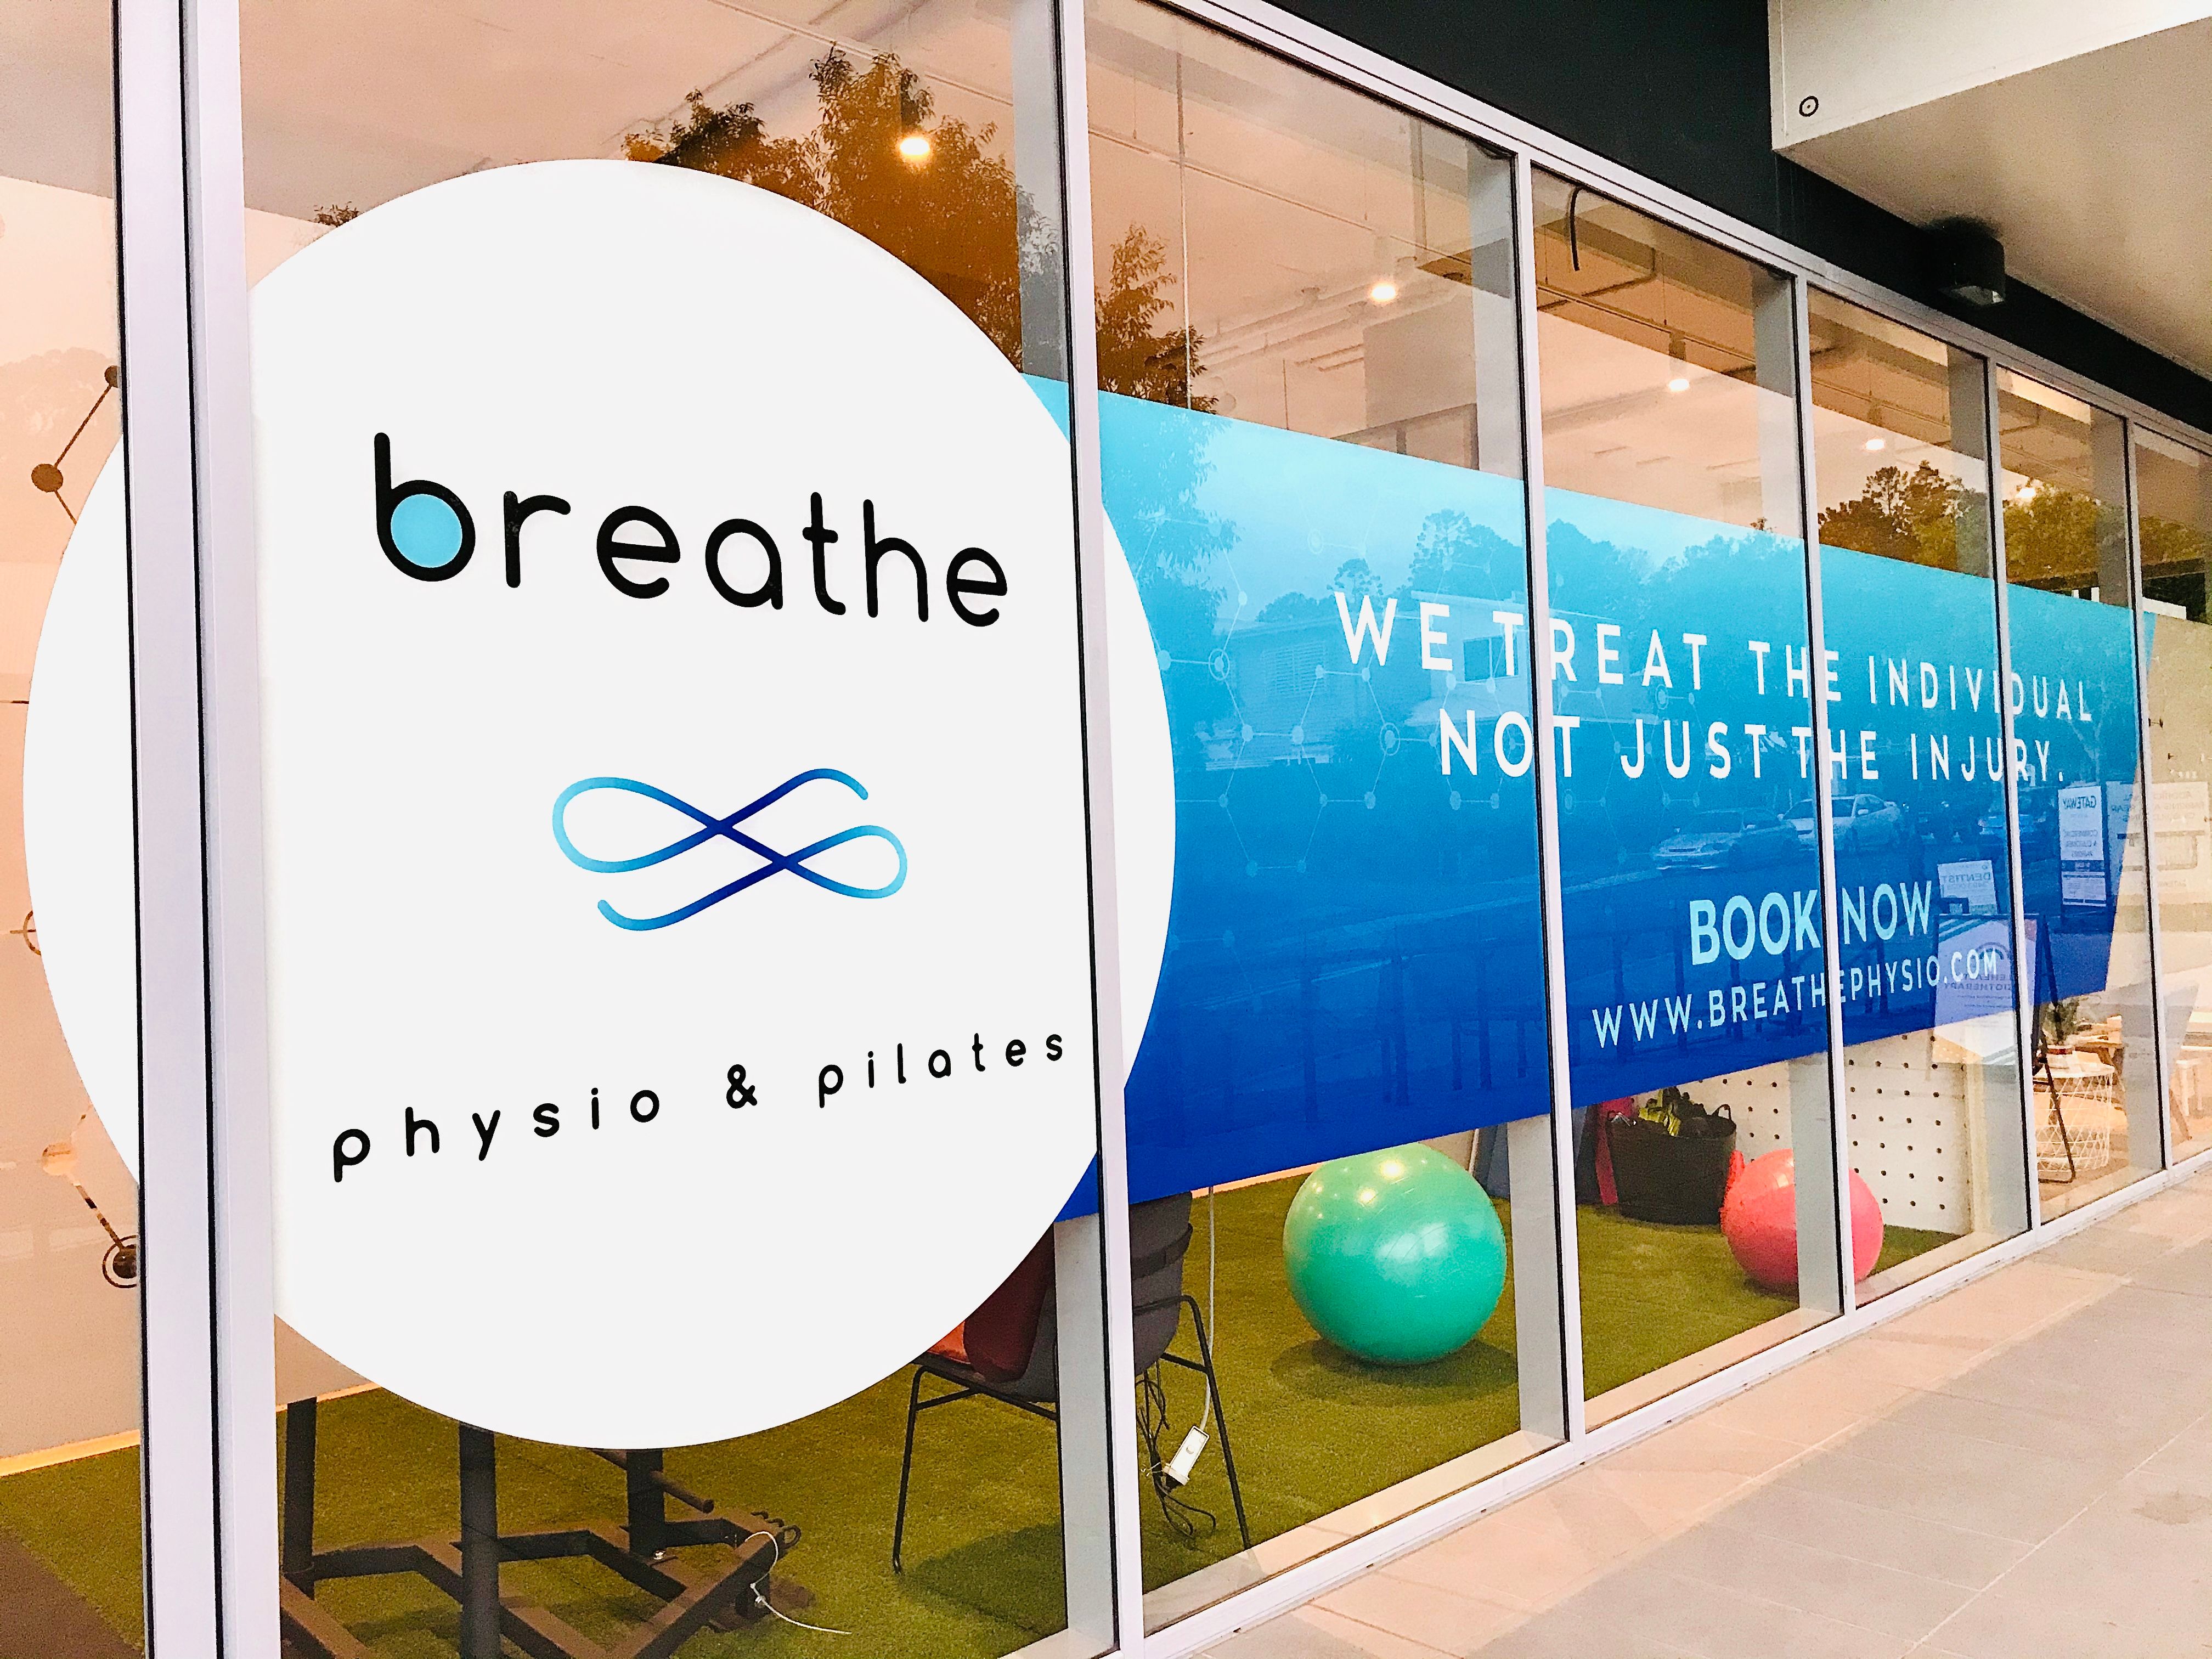 Breathe physiotherapy and pilates in Brisbane, Australia